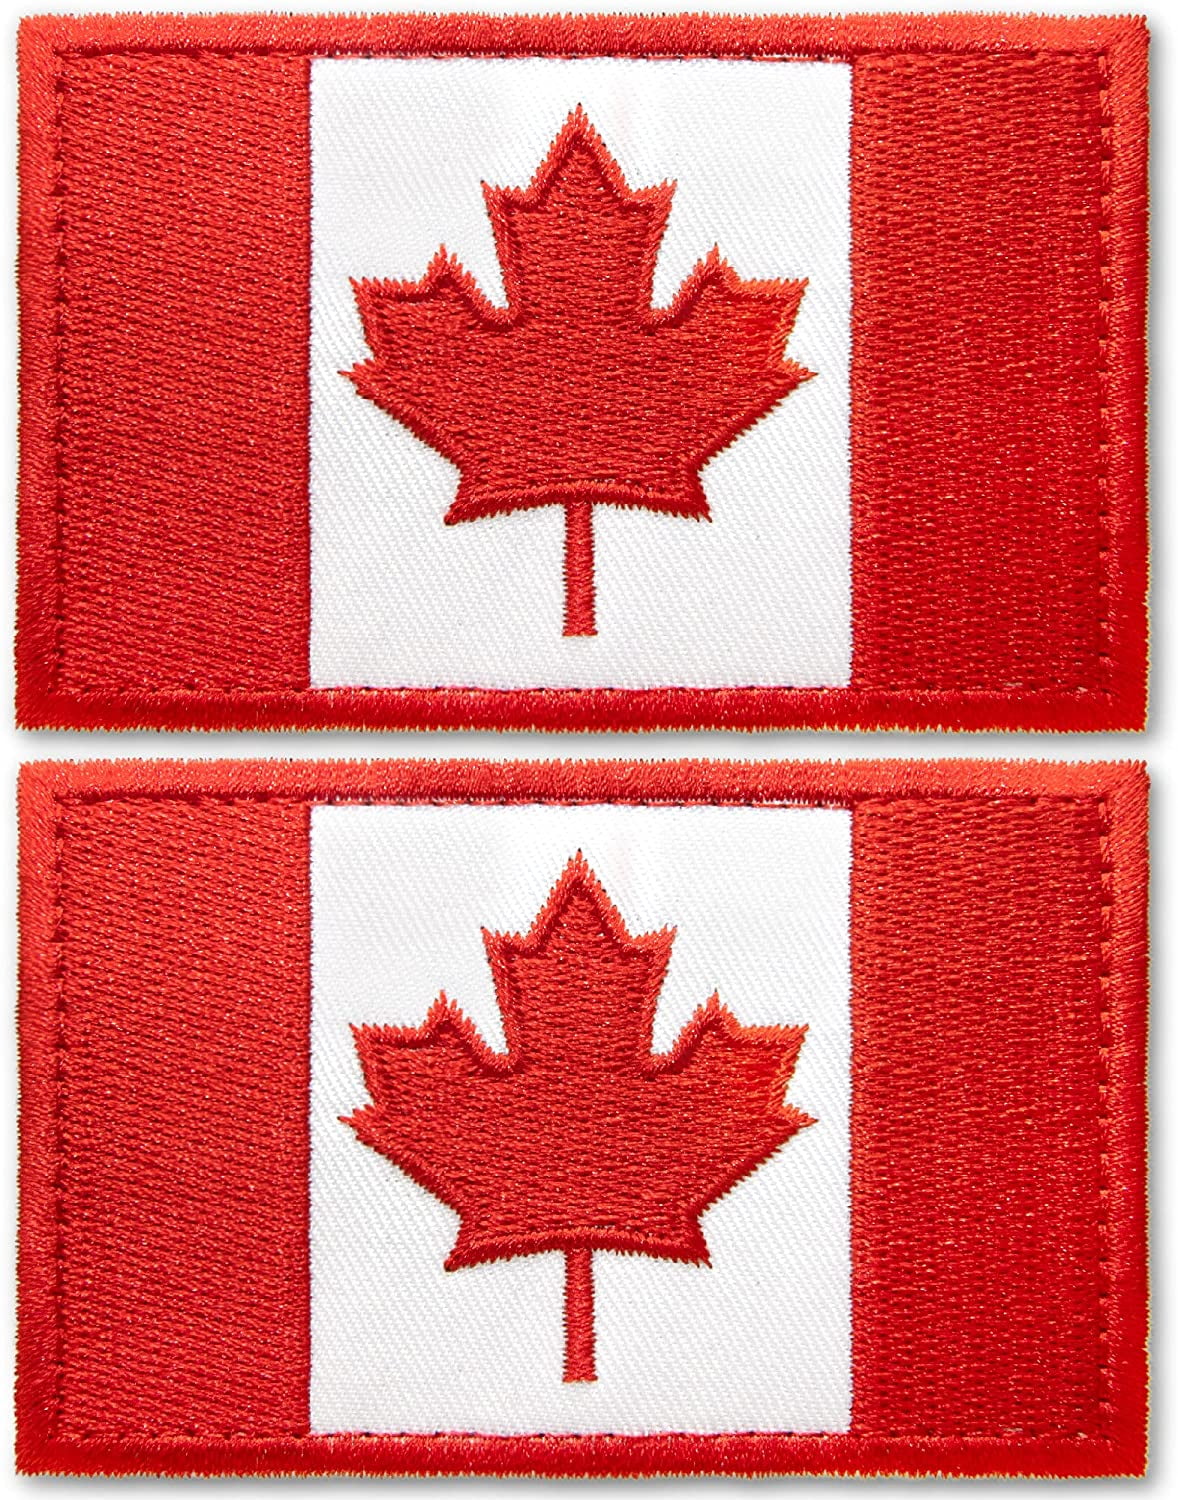 PROUD TO BE CANADIAN embroidered iron-on PATCH CANADA FLAG MAPLE LEAF 